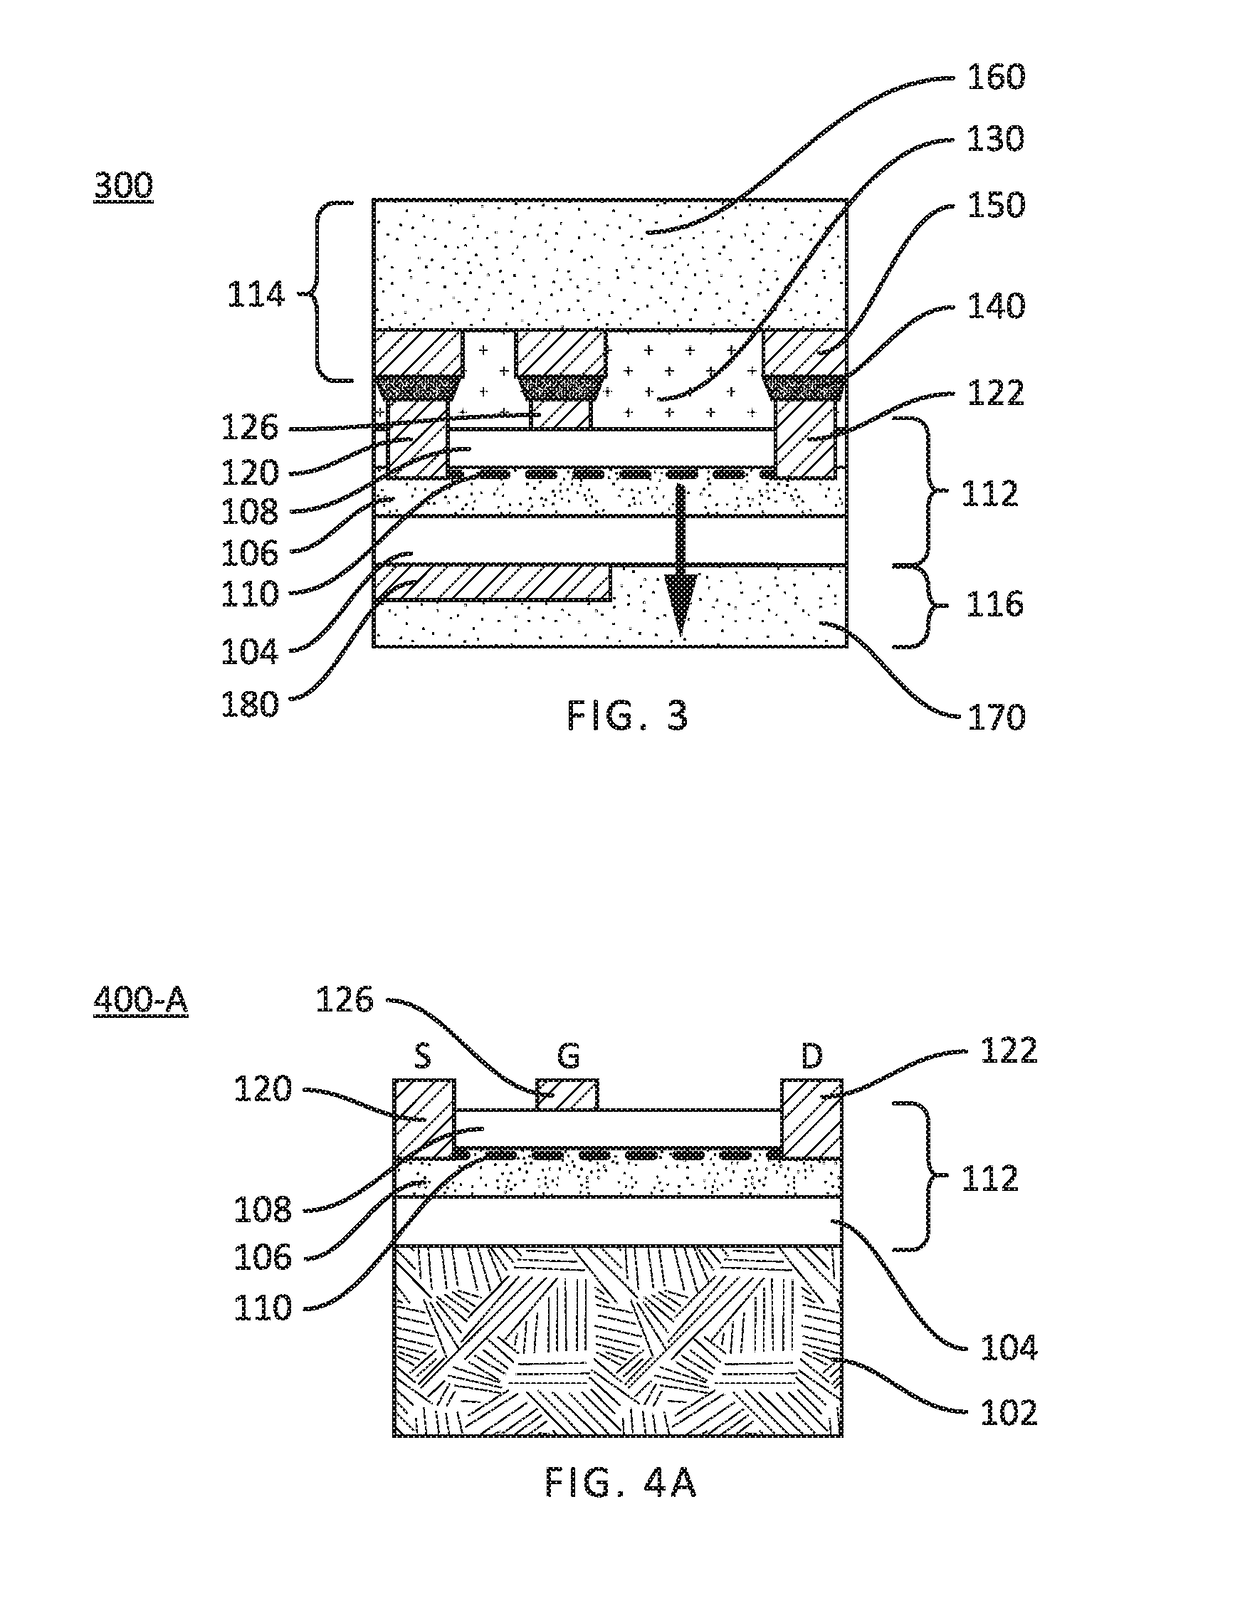 GaN semiconductor device structure and method of fabrication by substrate replacement